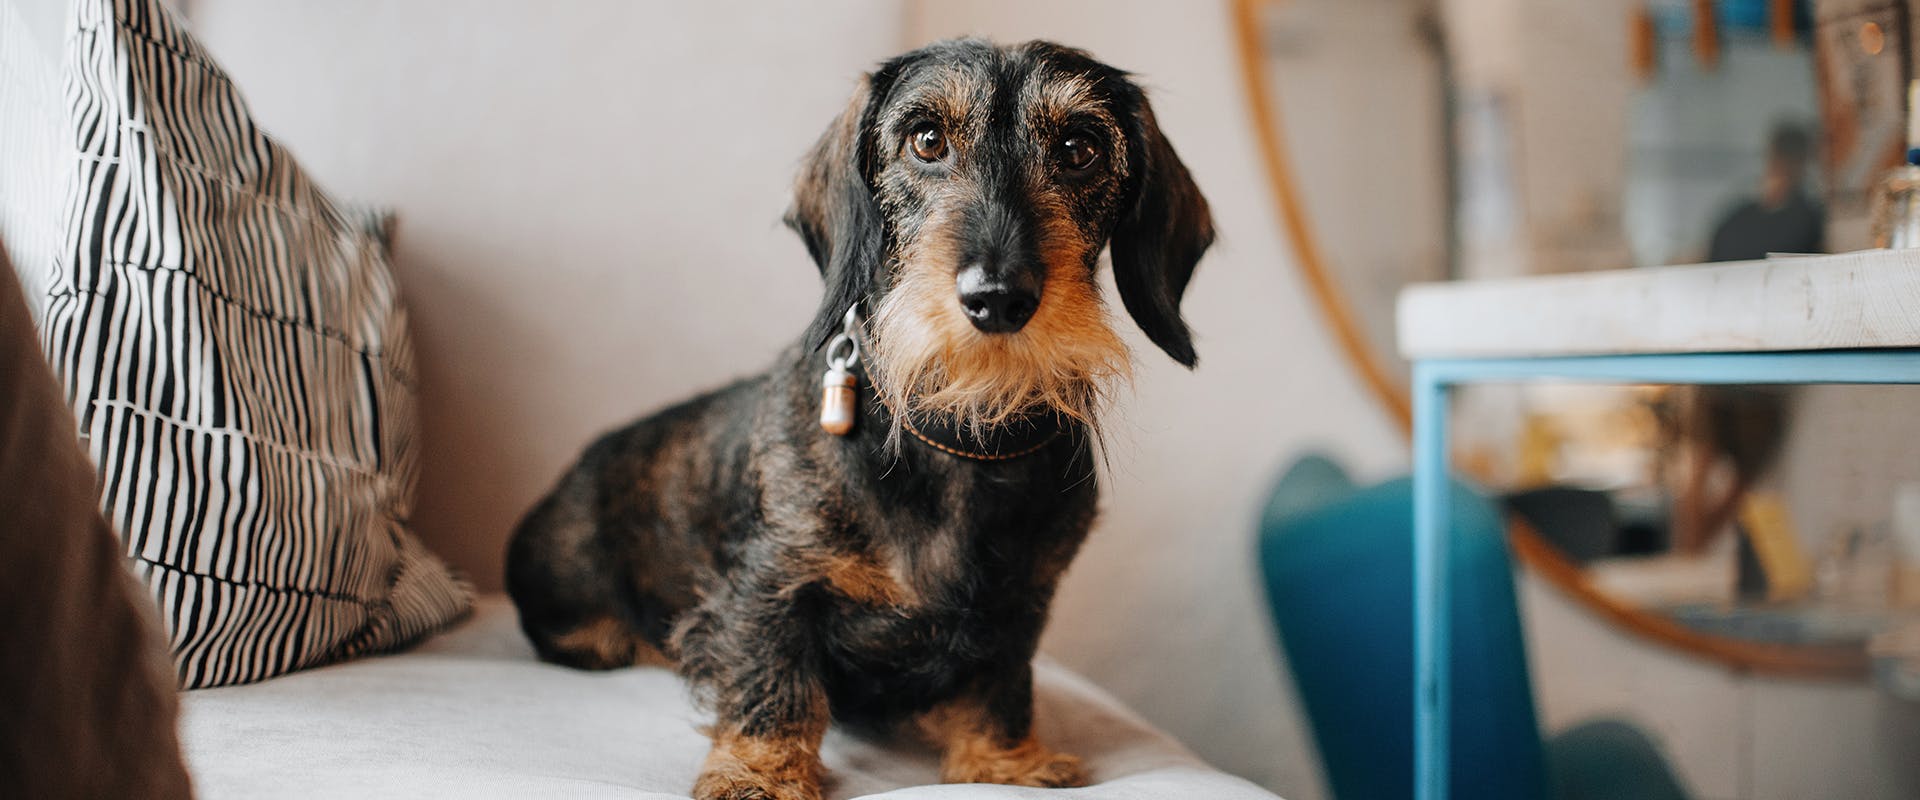 A wire-haired Dachshund sitting on a cushioned seat net to a table